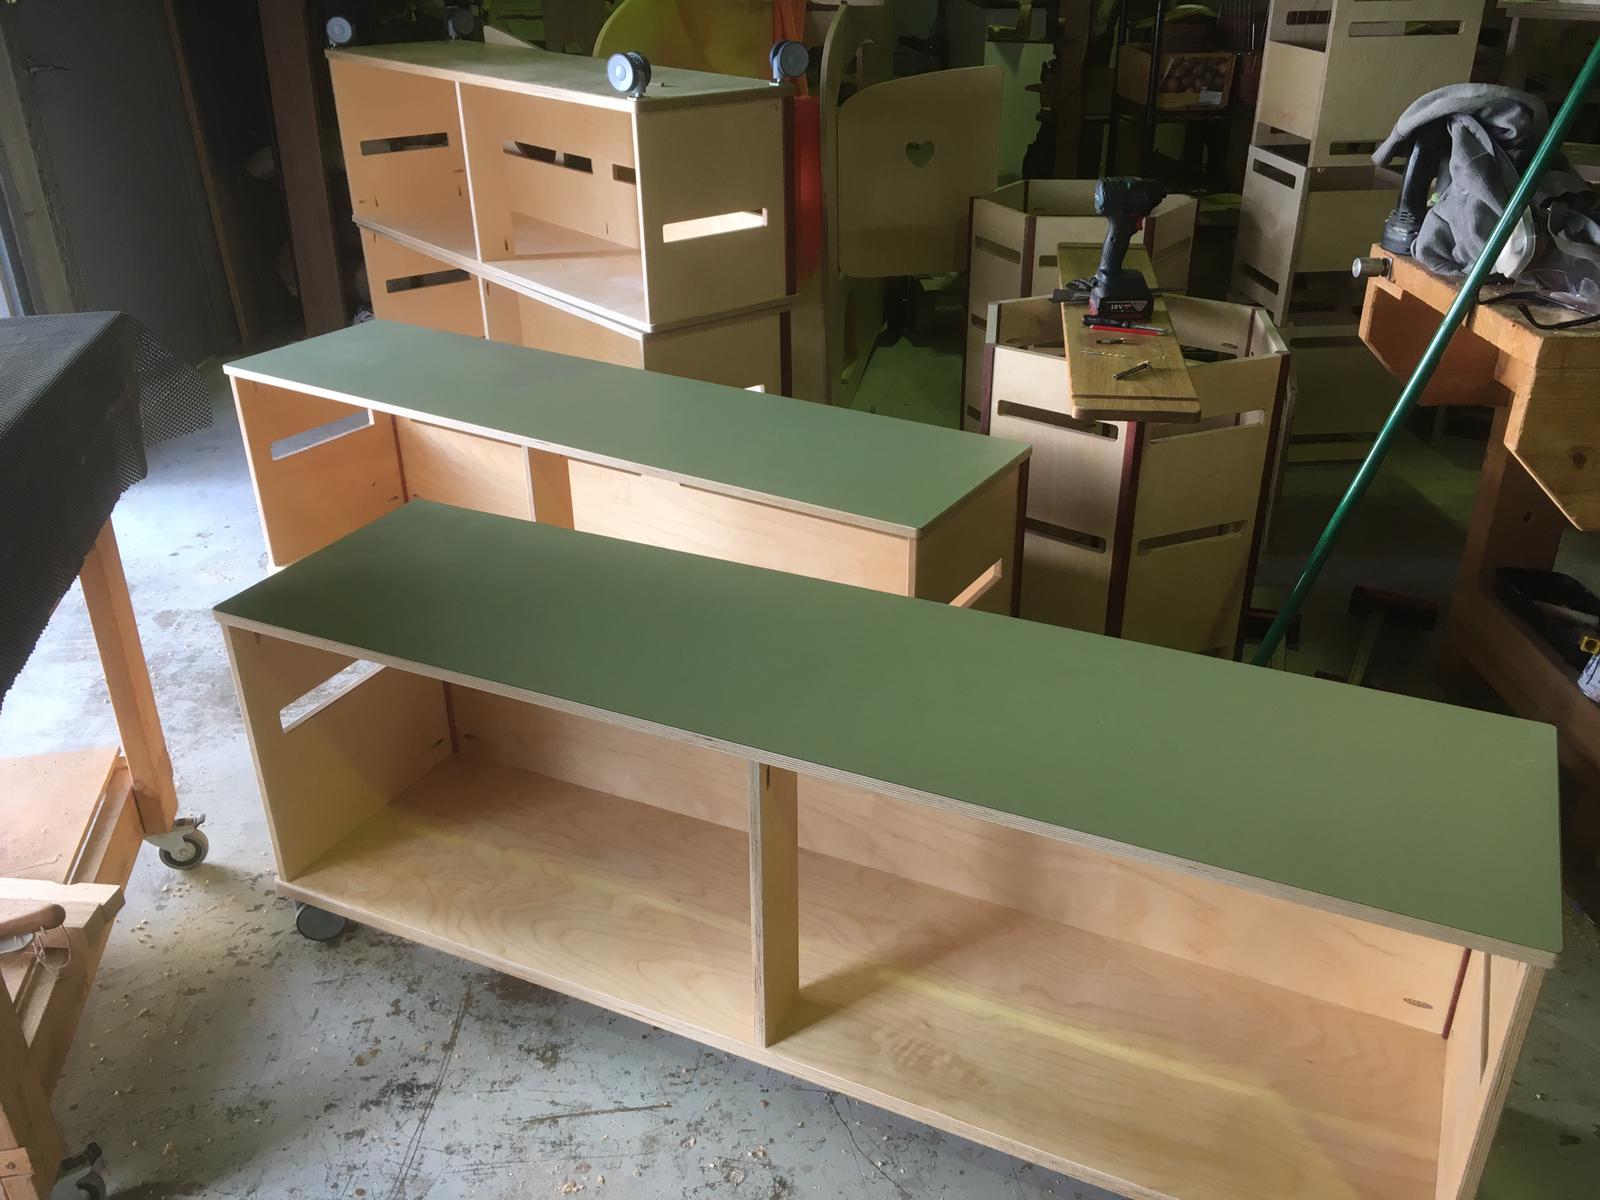 crafted wood - stage craft school furniture